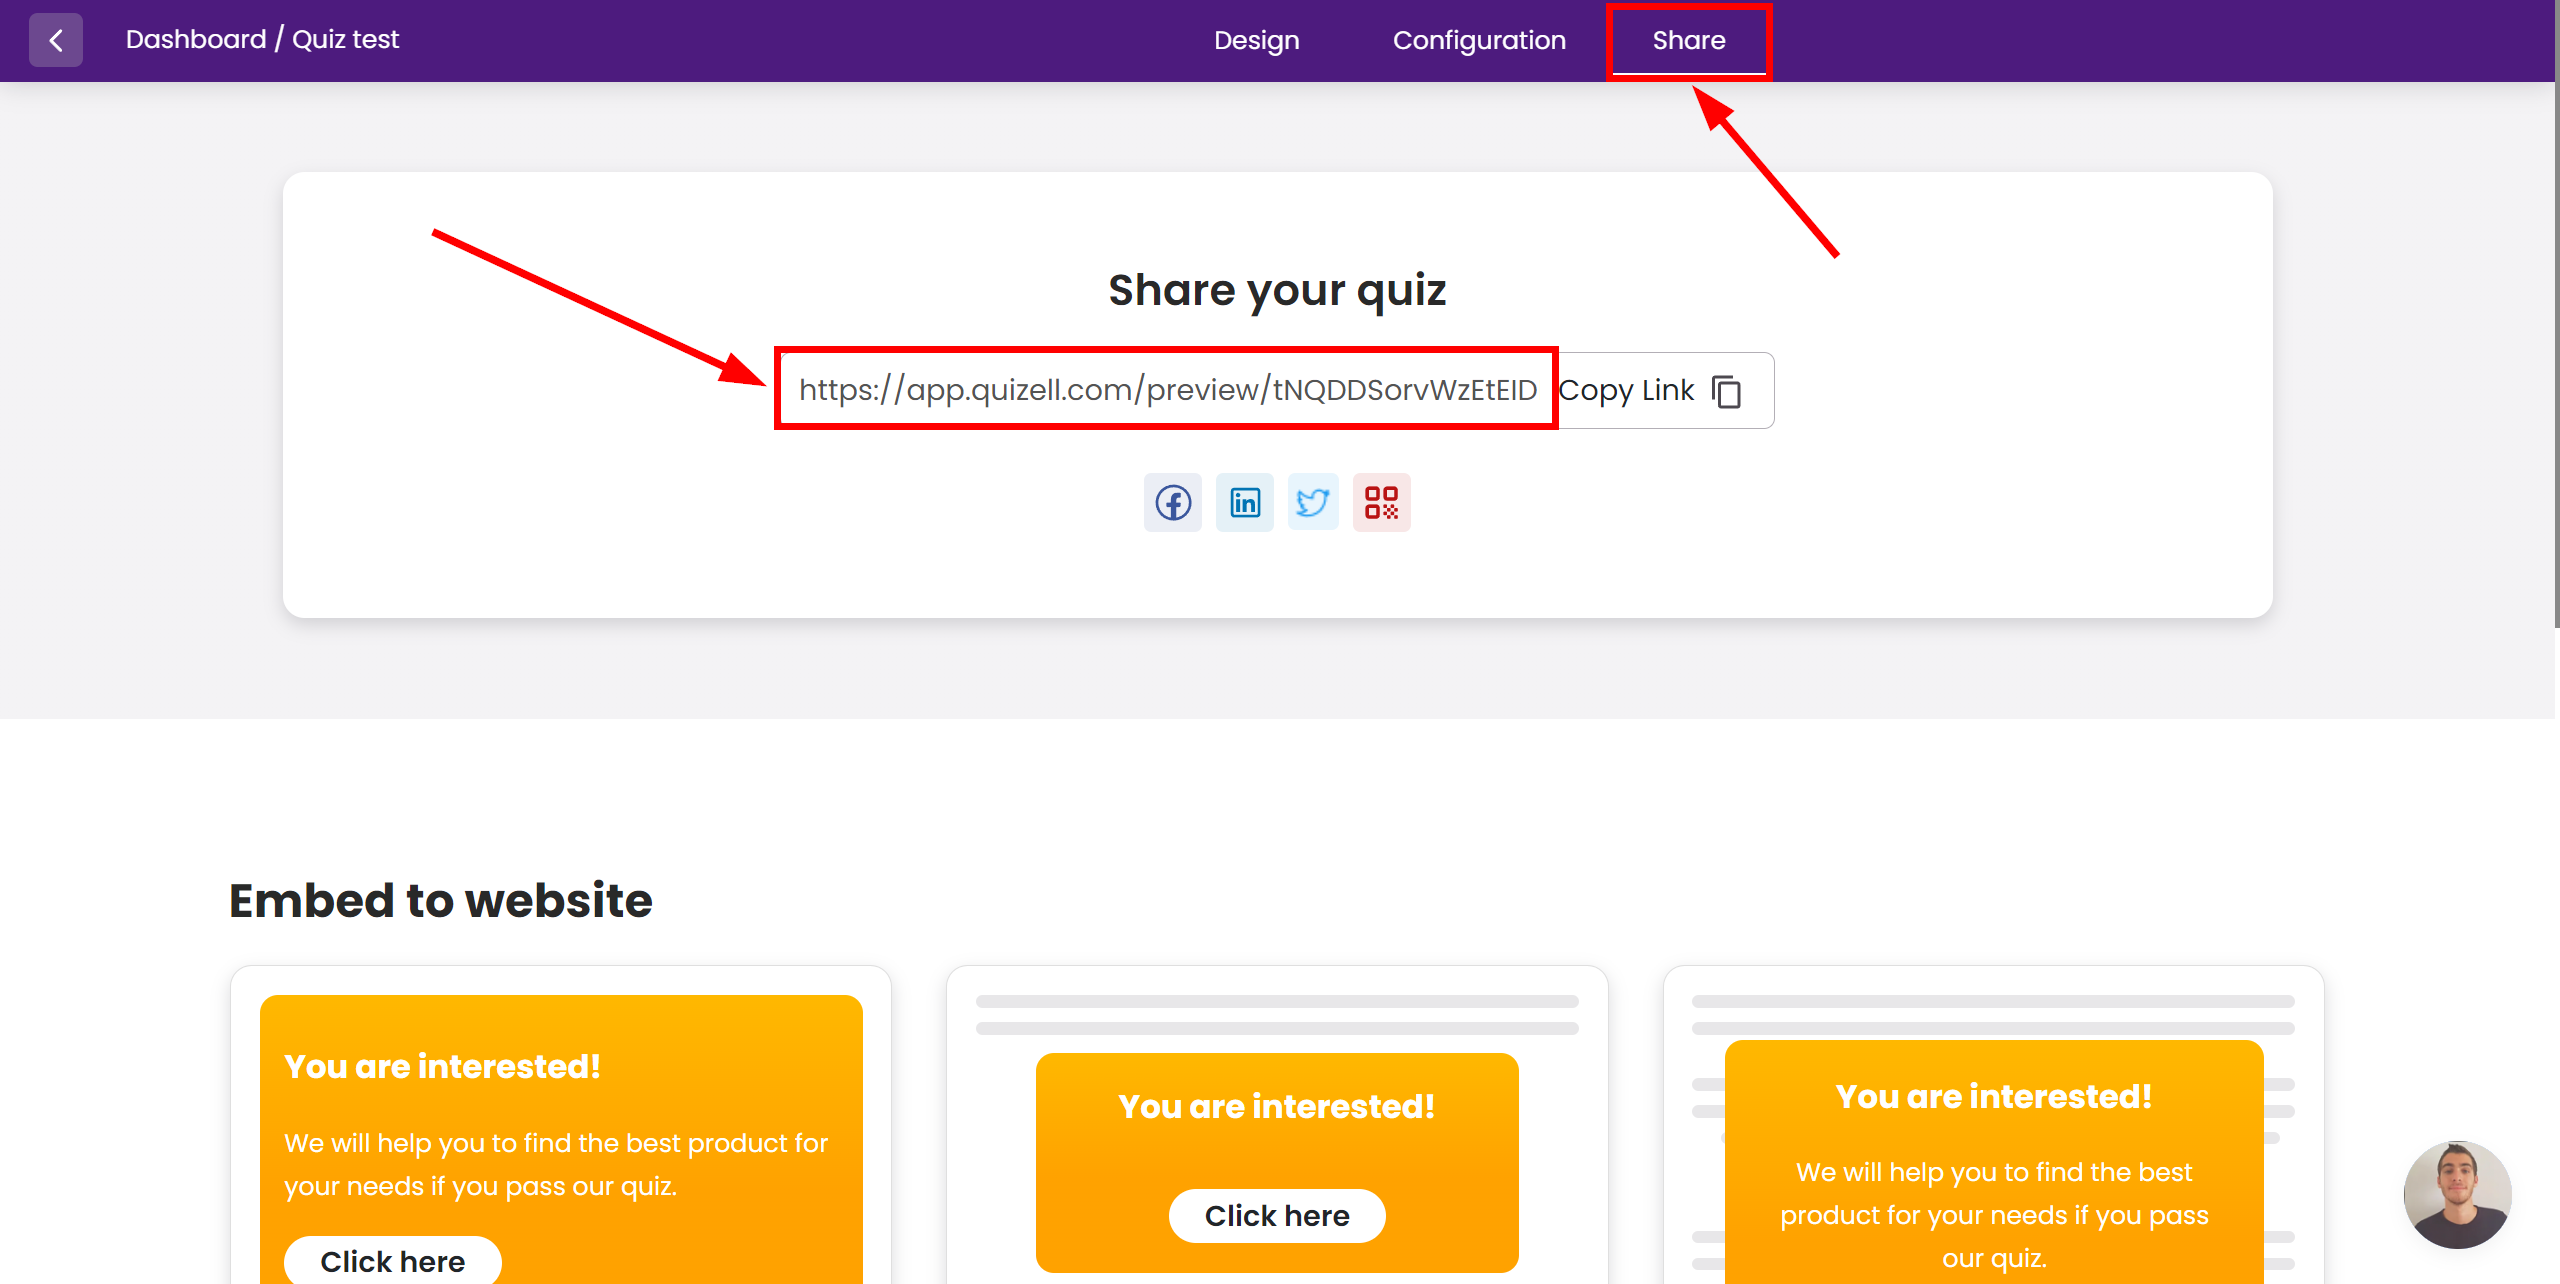 How to Connect Quizell as Data Source | Generating test data for a quiz